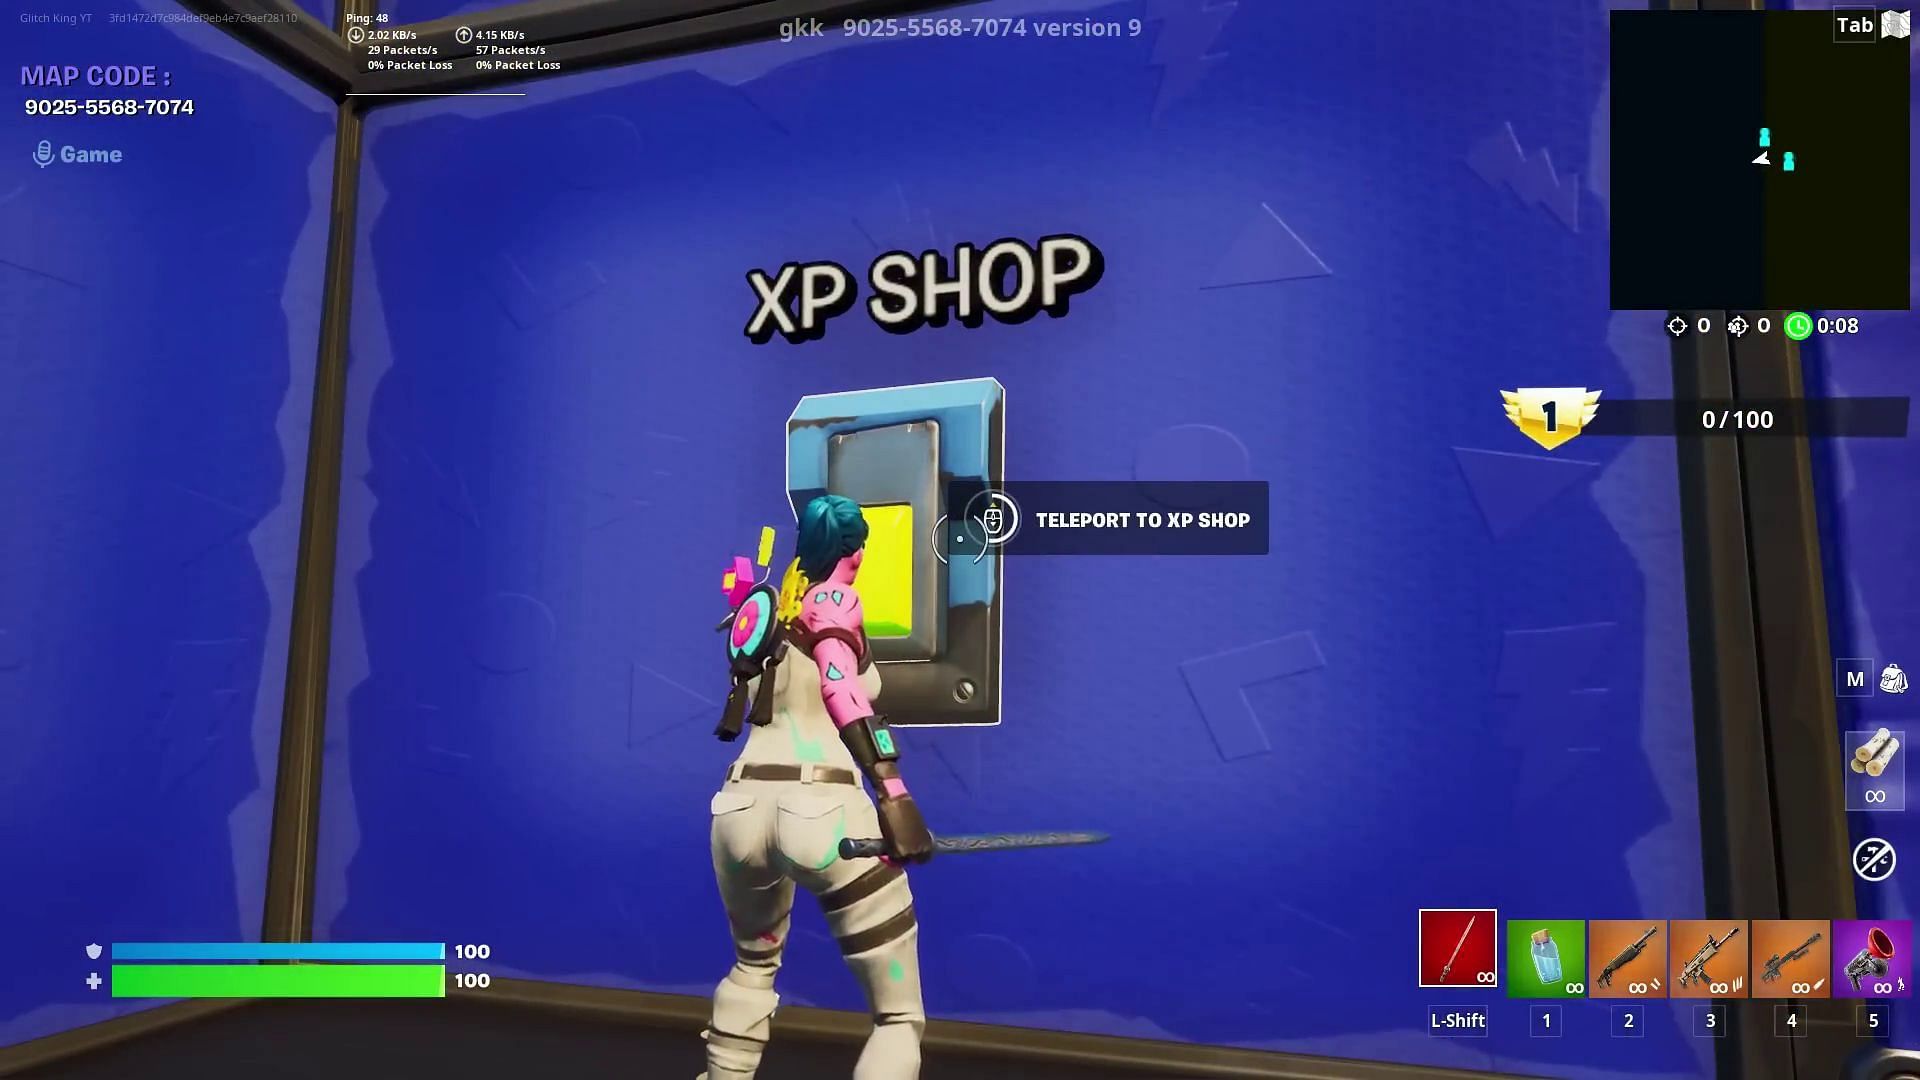 Loopers would need to press the XP Shop button to enter the area (Image via YouTube/GKI)